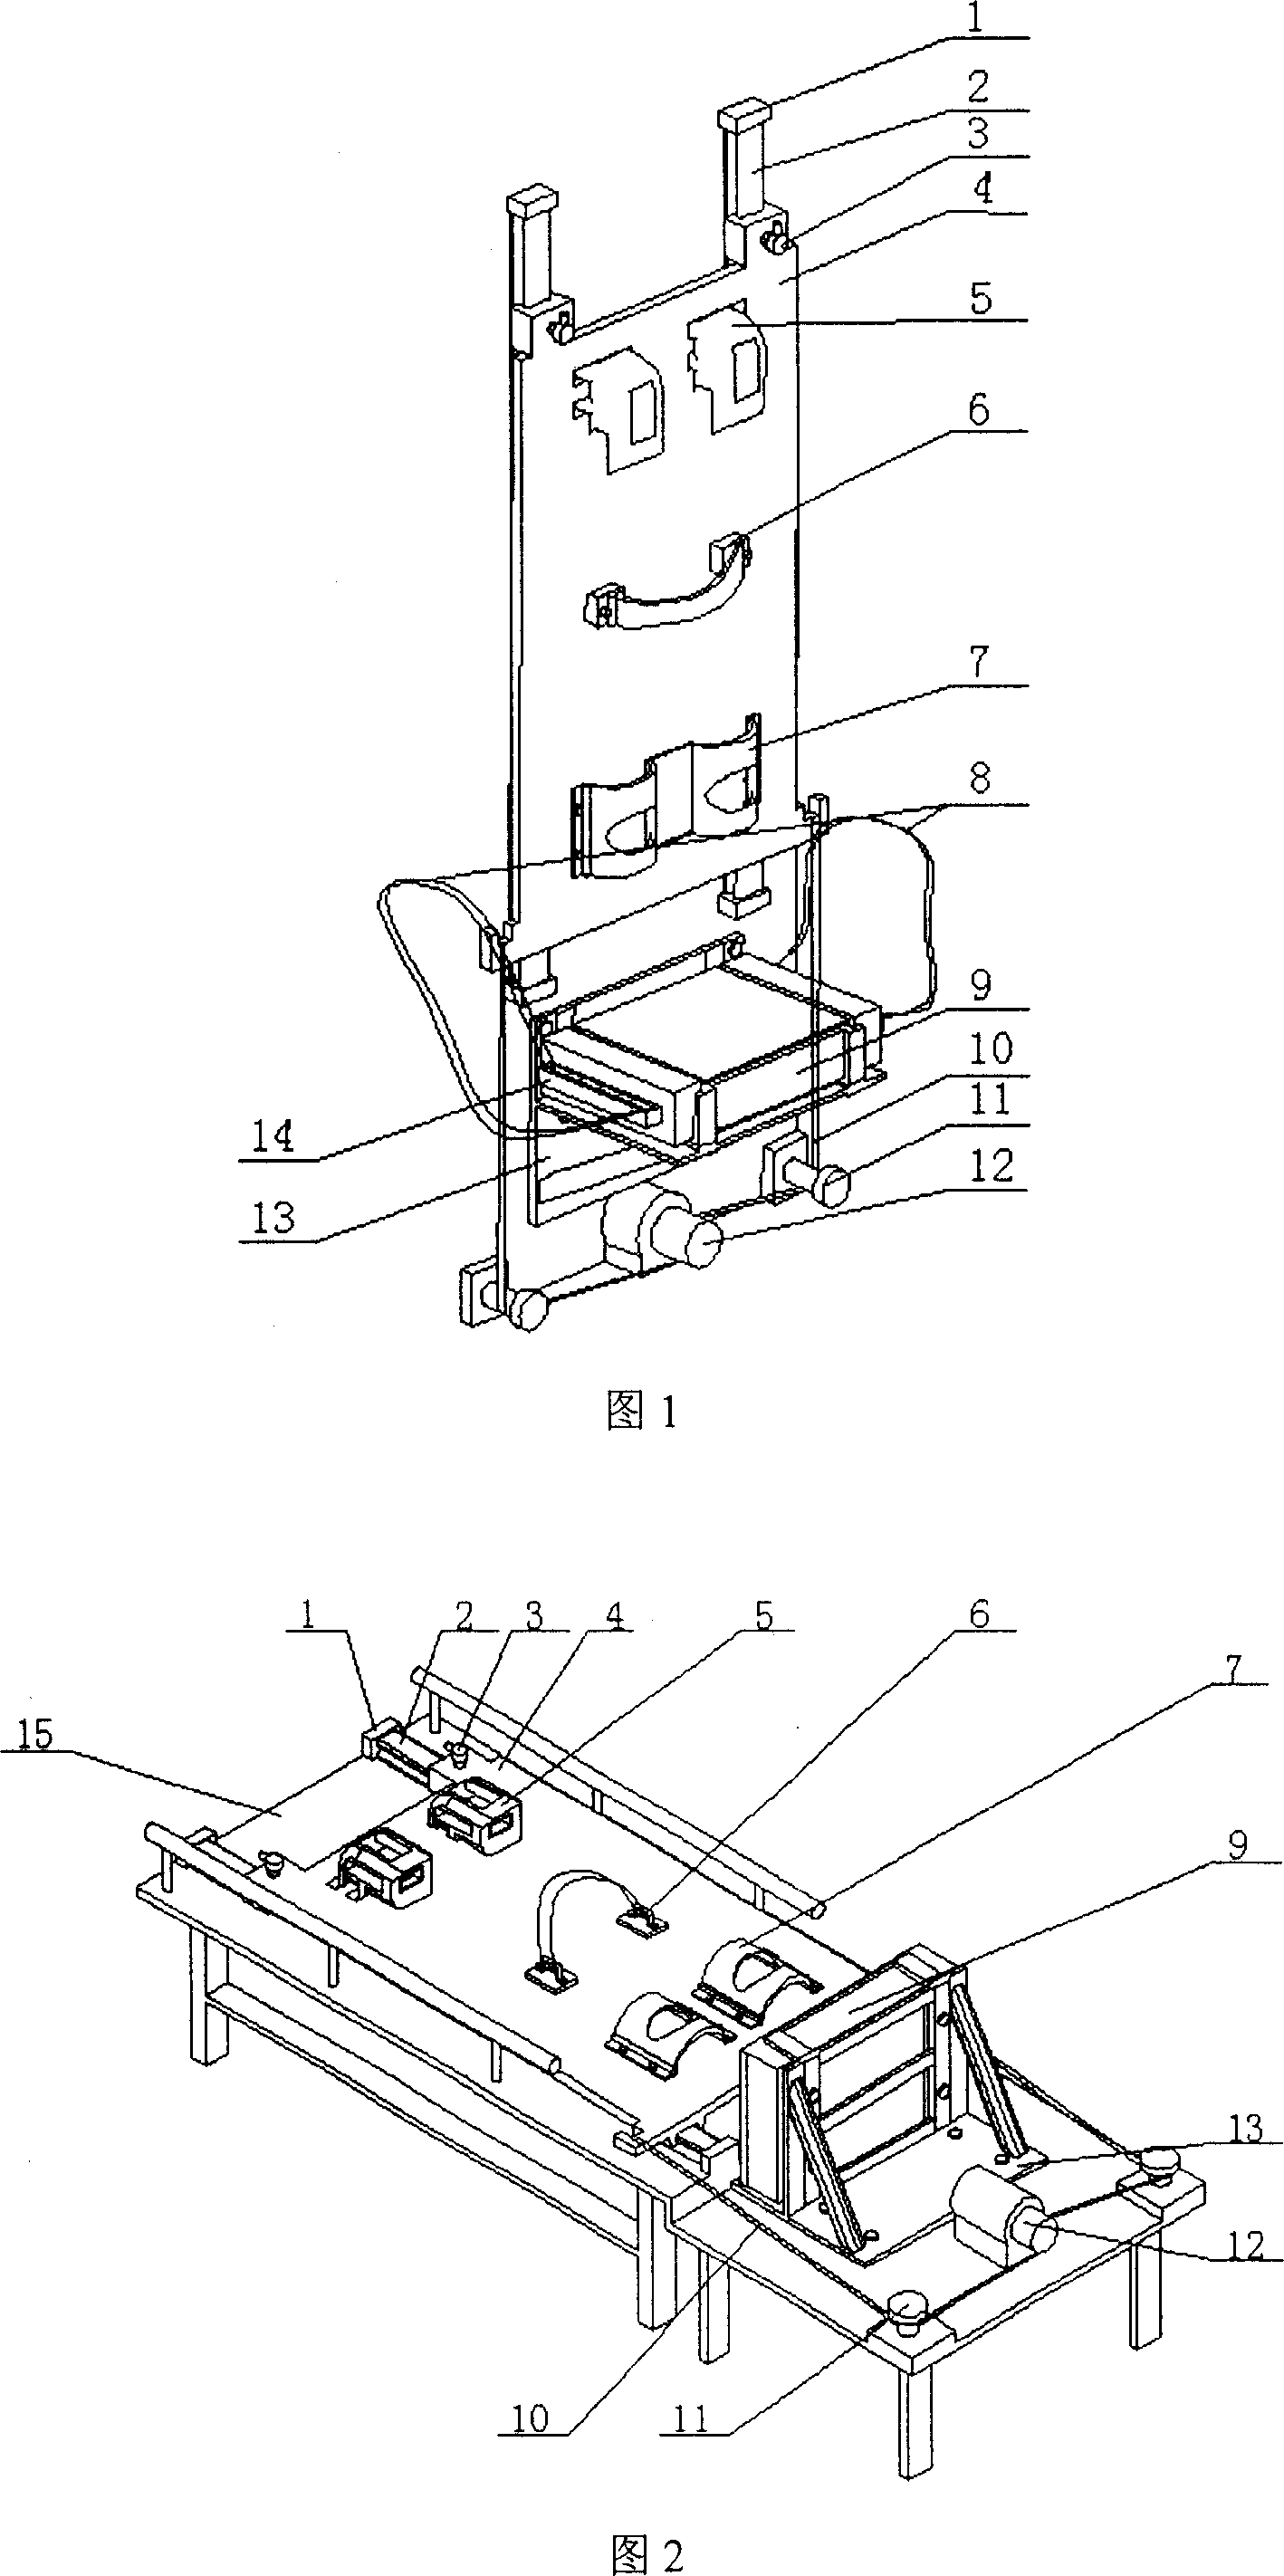 Apparatus for preventing and treating spatial weightlessness bone loss